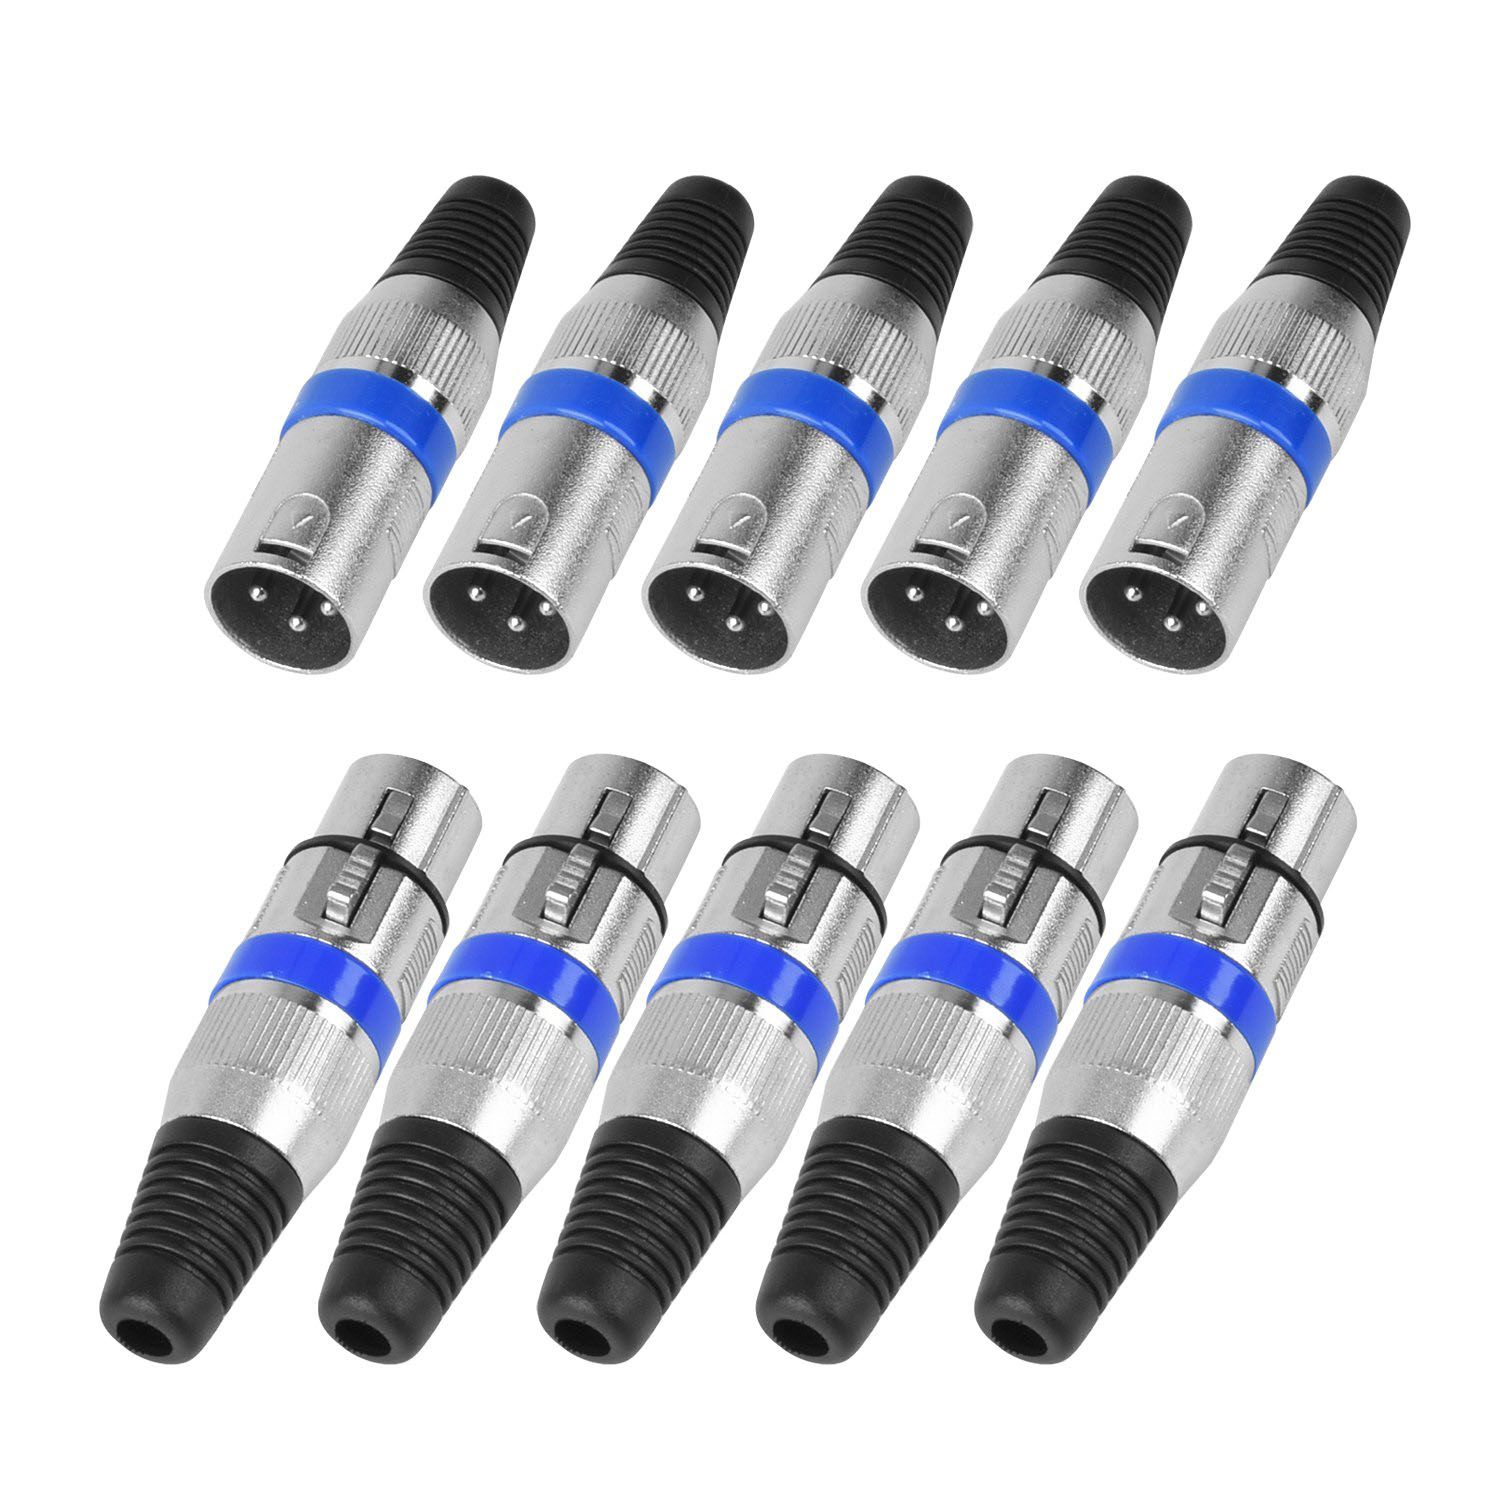 xlr 3 pin Connectors 10 pairs male and female 